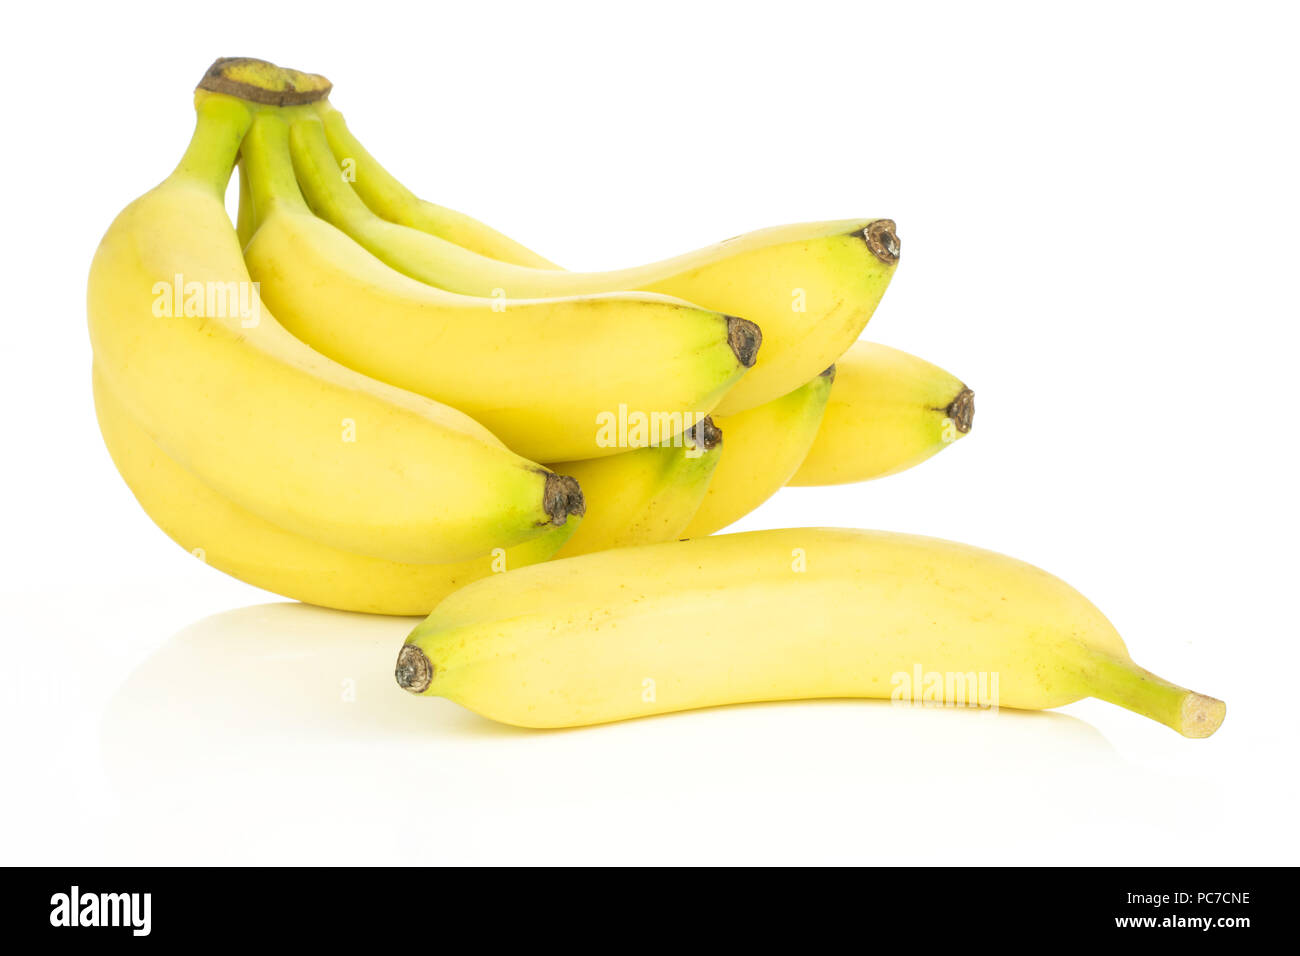 Lot of whole fresh yellow banana one cluster with separated banana isolated on white background Stock Photo